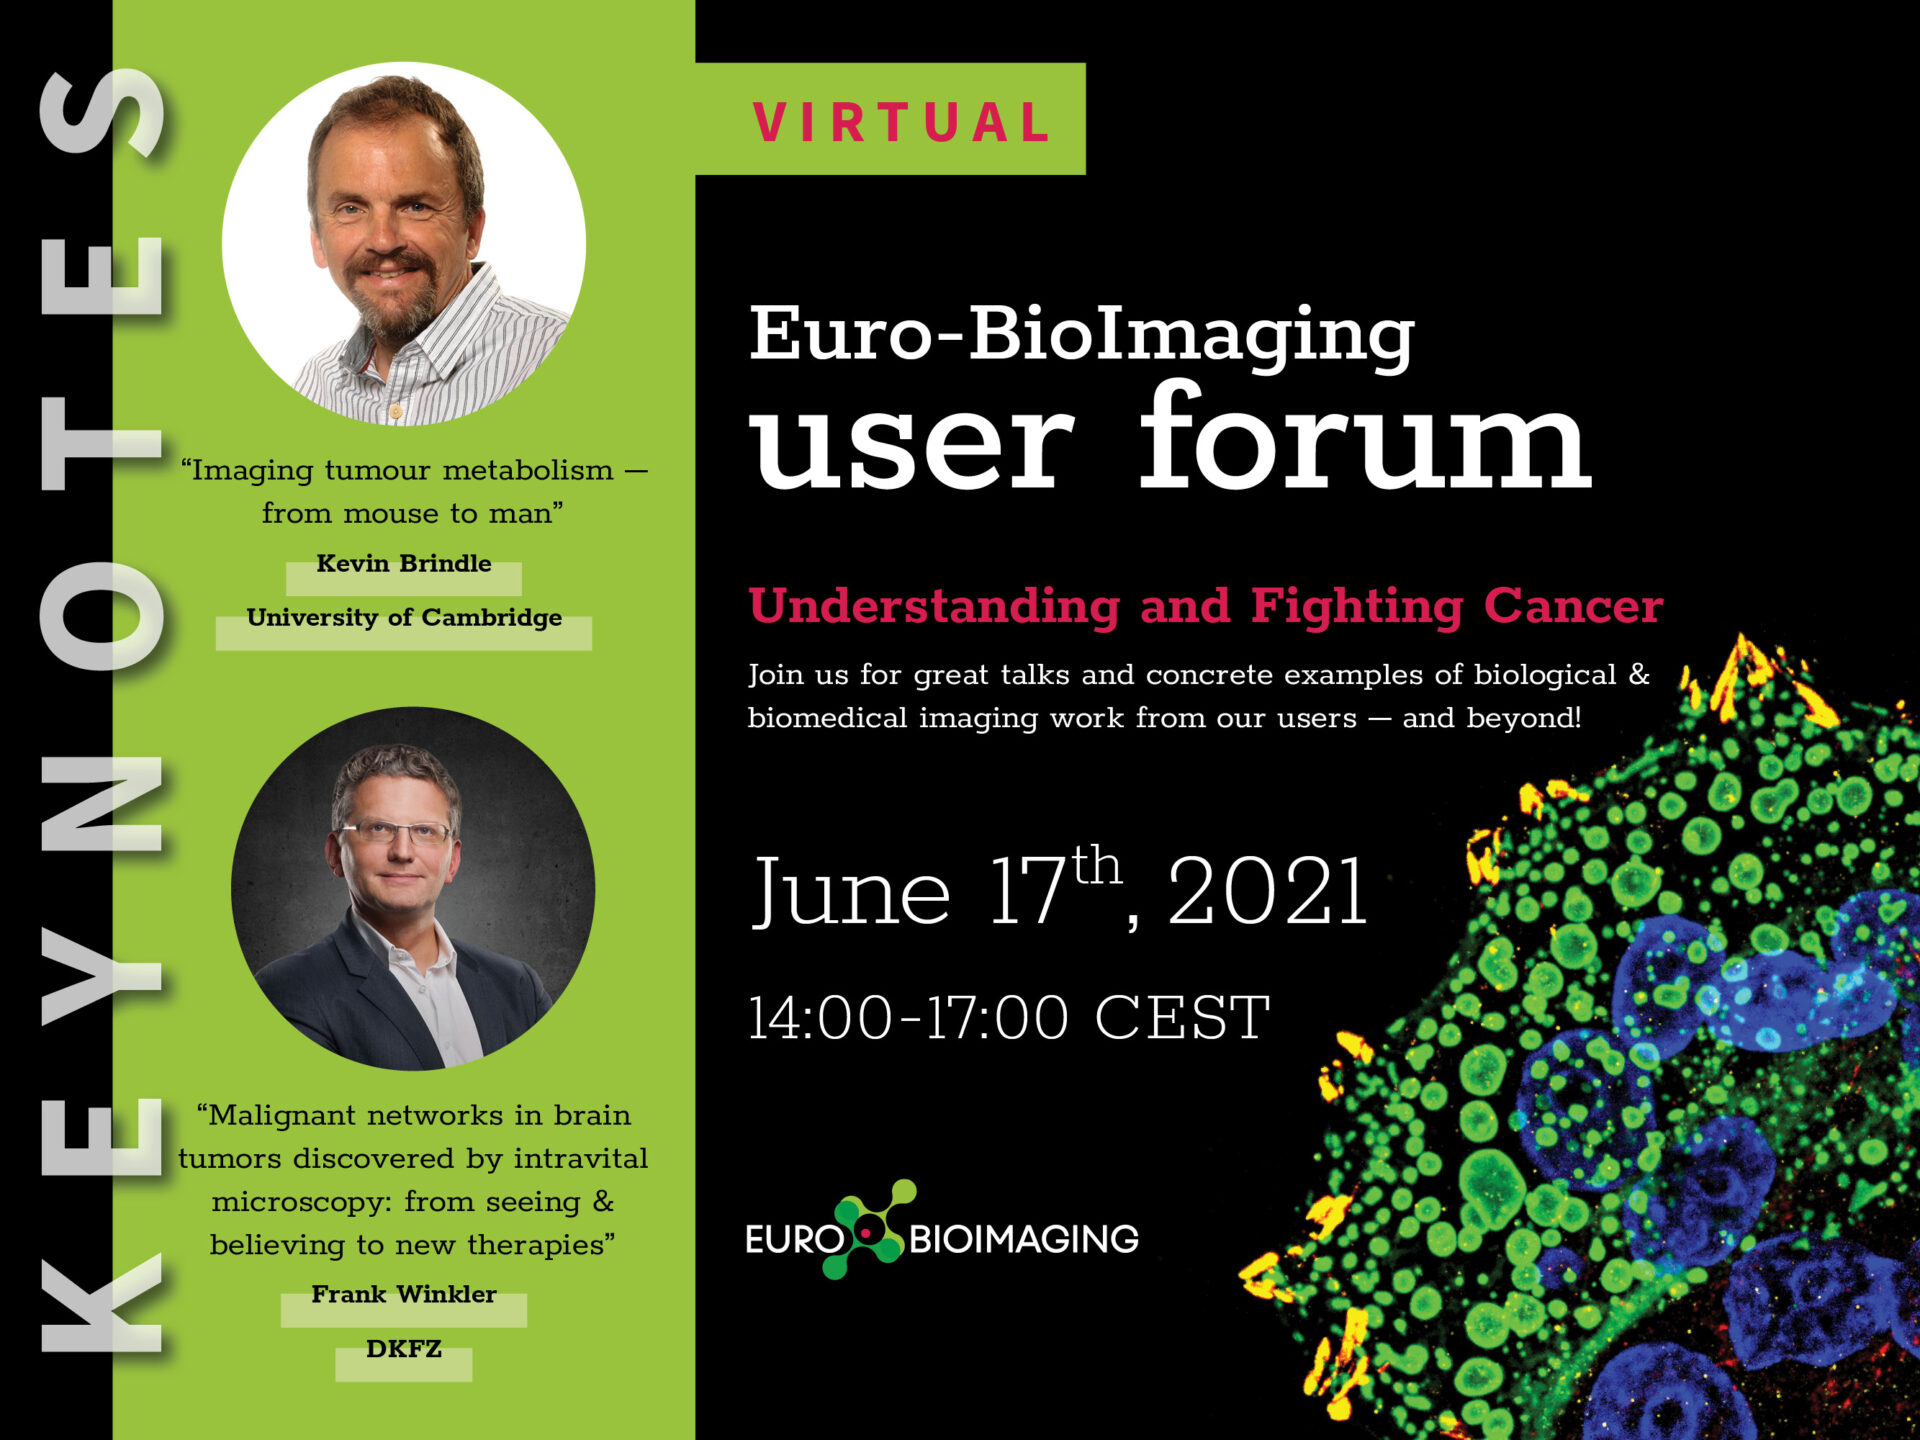 Euro-BioImaging User Forum about Understanding and Fighting Cancer promo